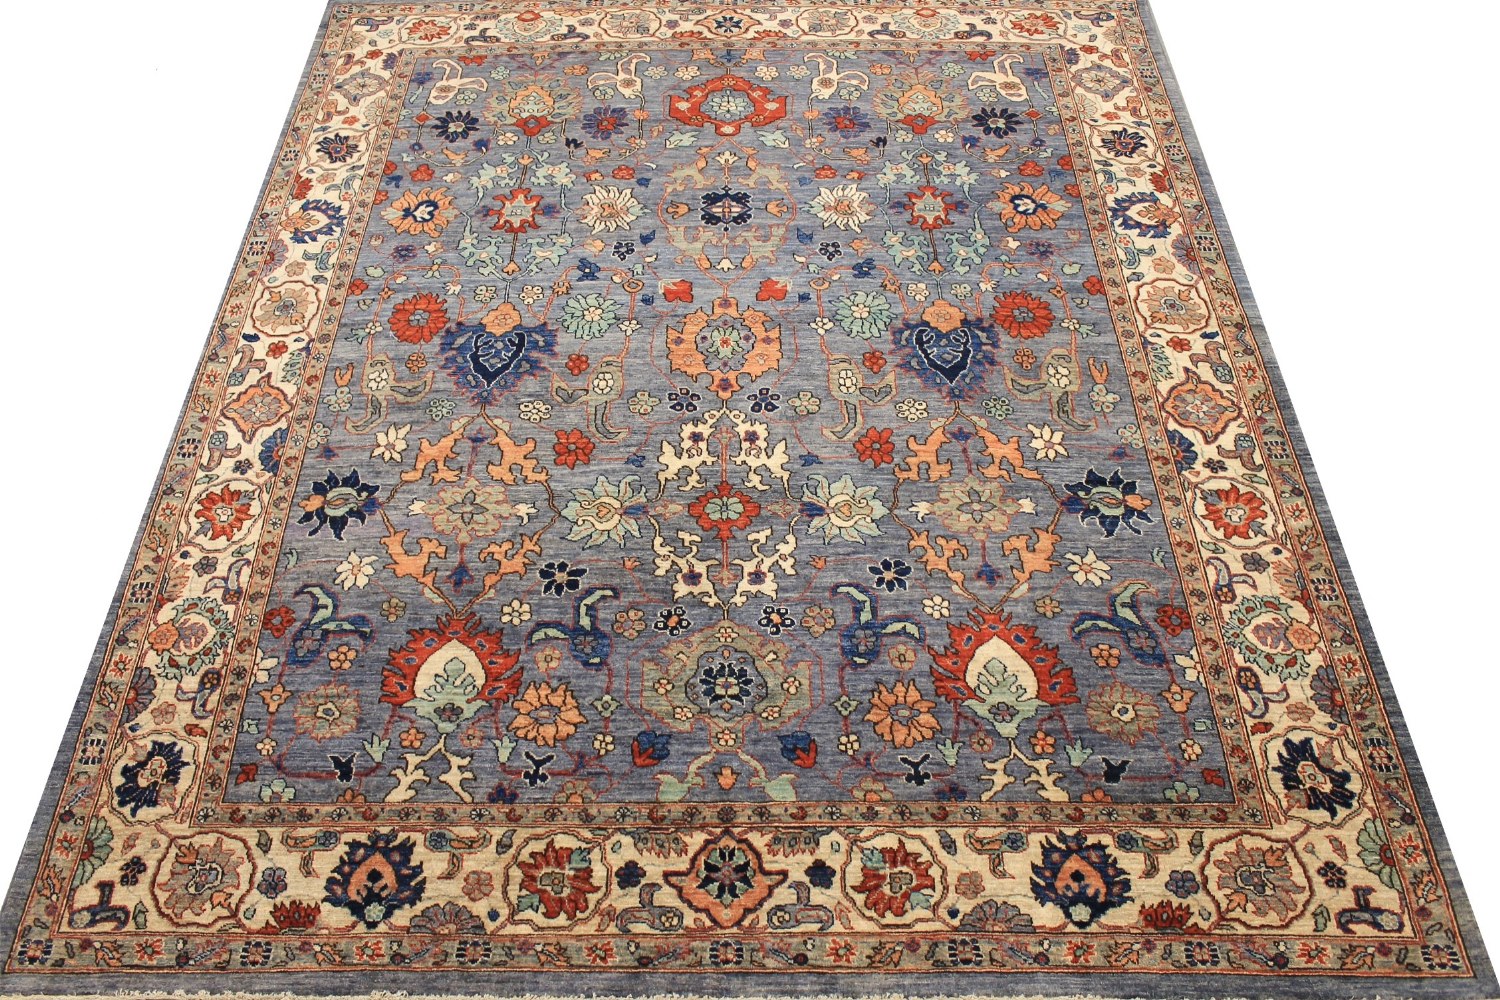 8x10 Aryana & Antique Revivals Hand Knotted Wool Area Rug - MR027829